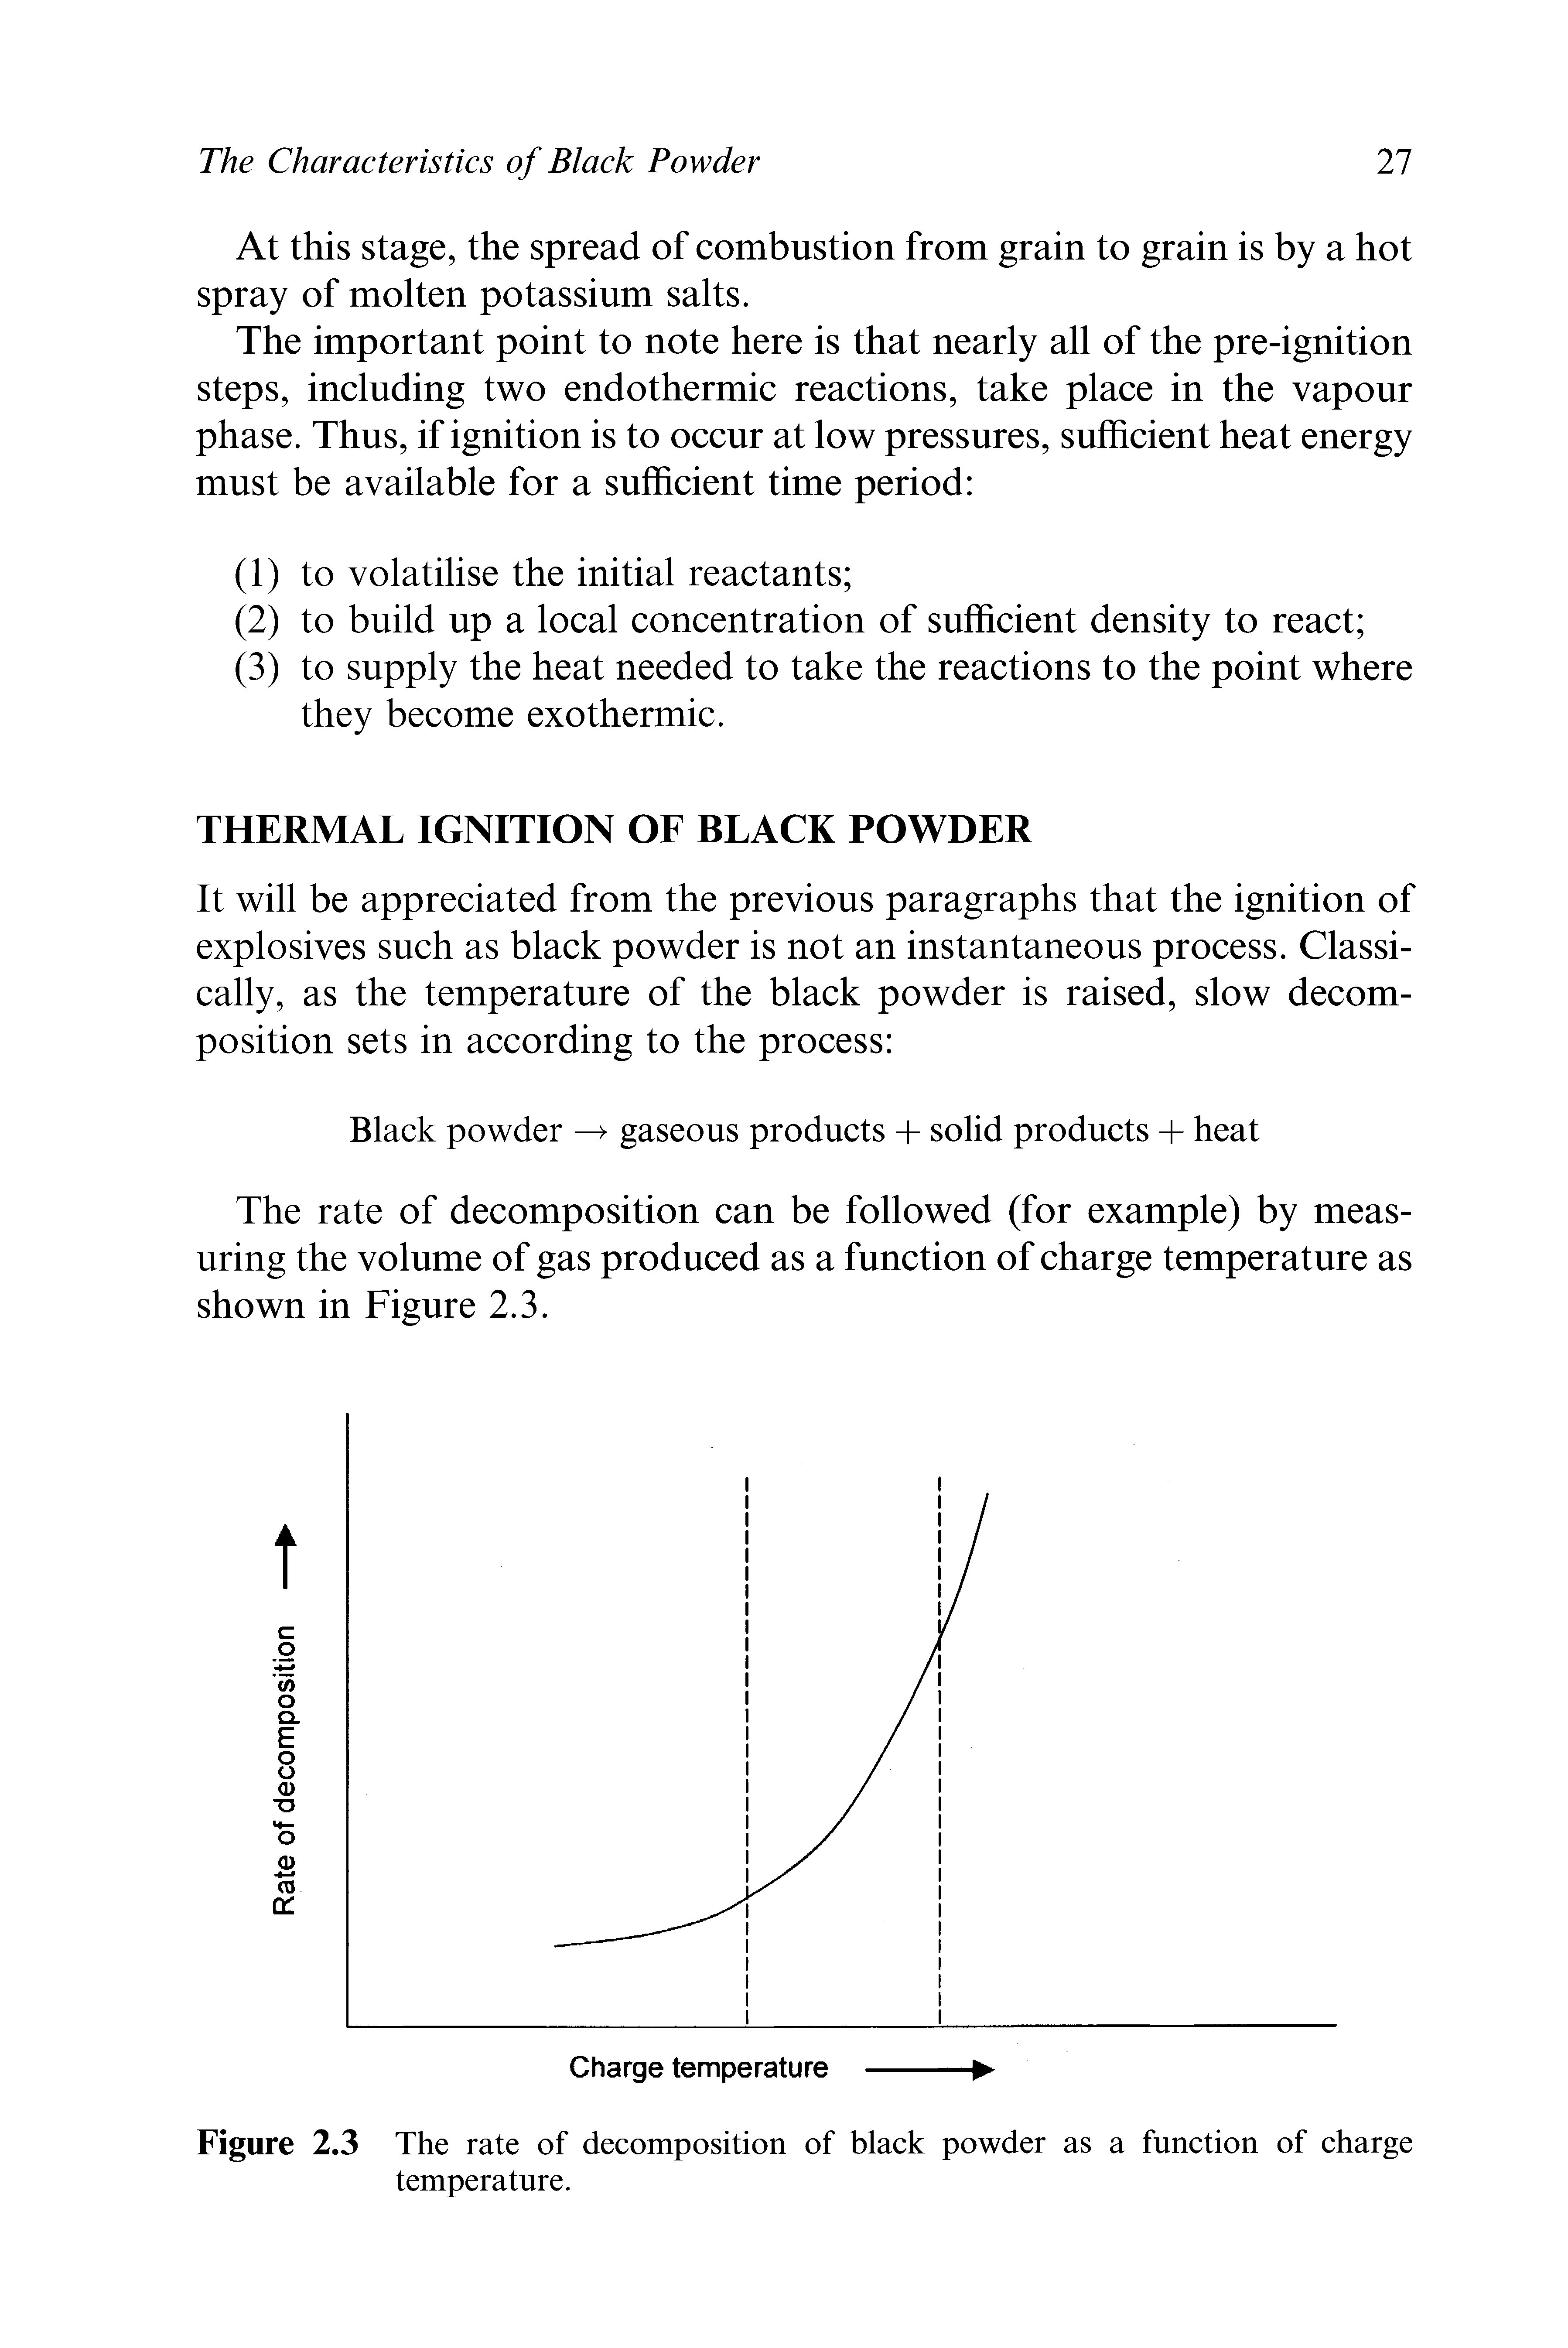 Figure 2.3 The rate of decomposition of black powder as a function of charge temperature.